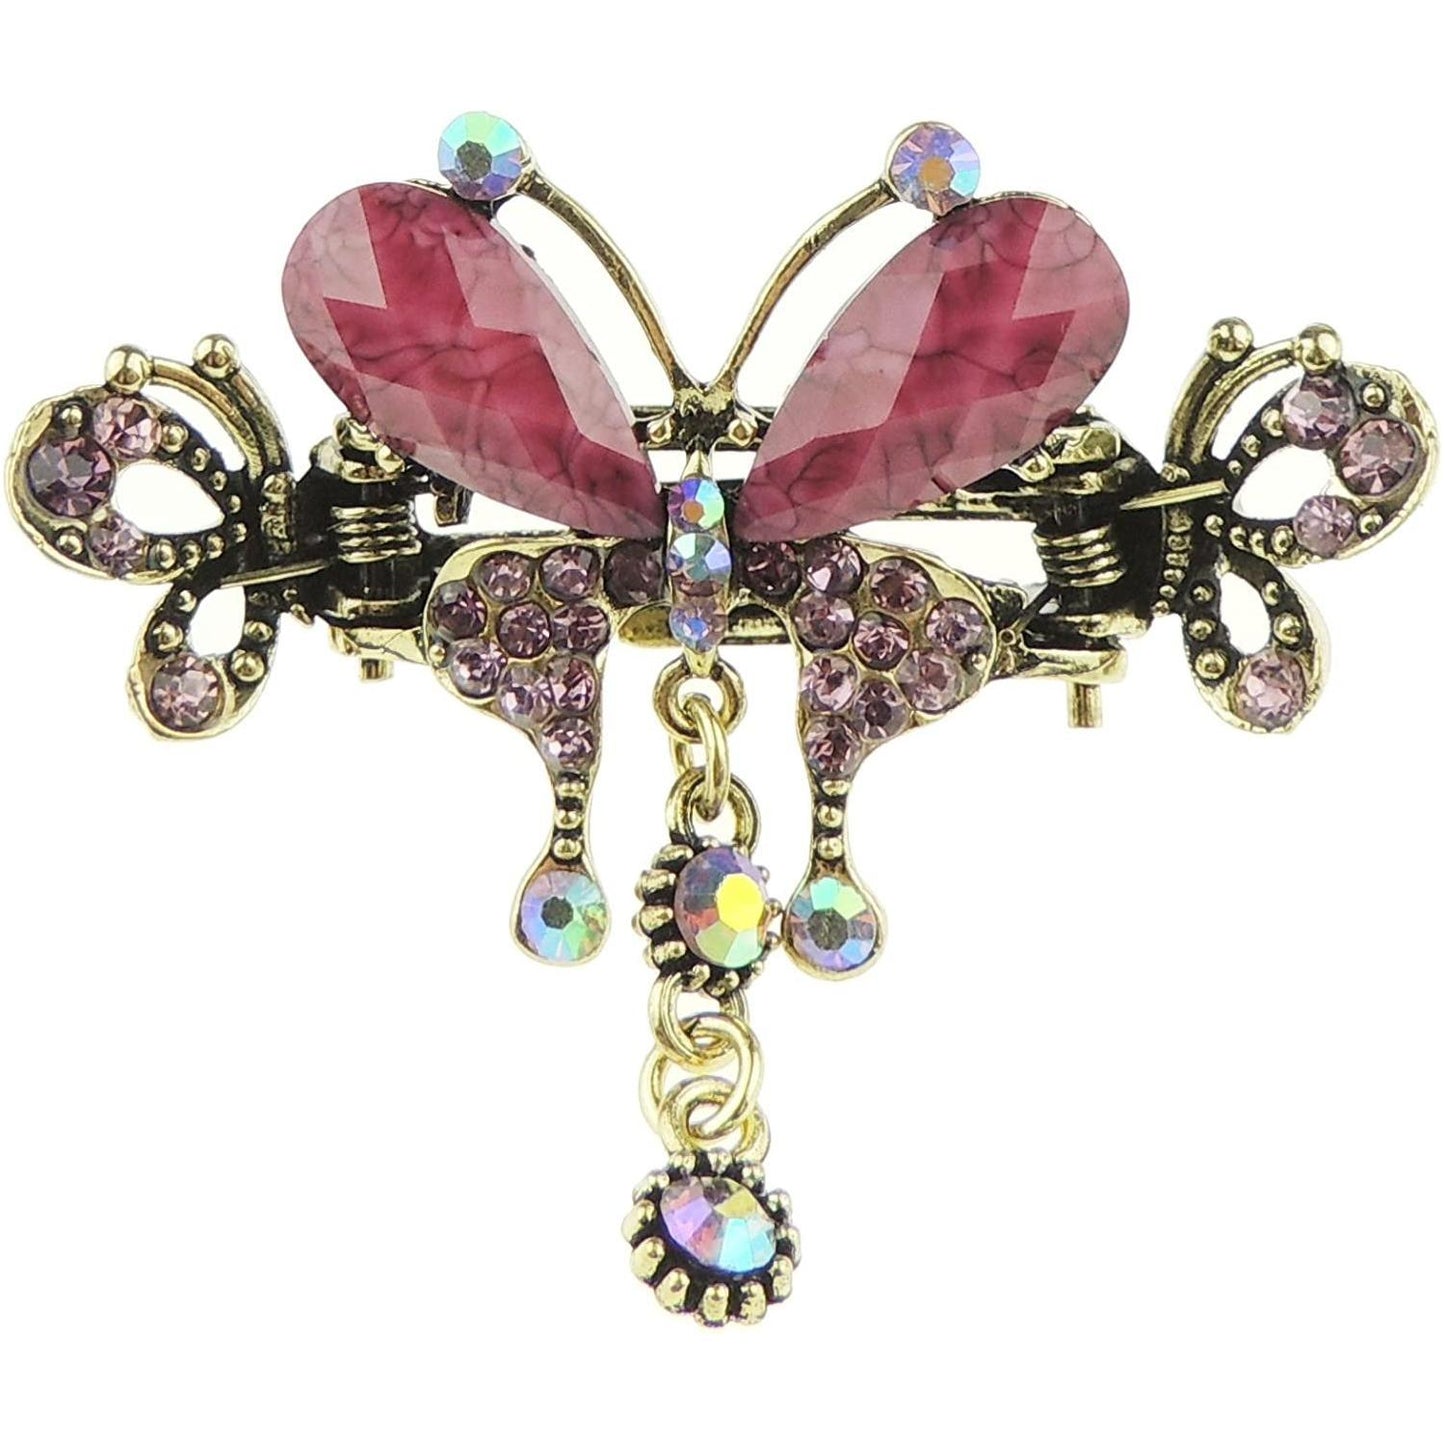 Ladies Bronzed Gold Tone Metal Diamante Crystal Small 6cm Hair Claw Clamp Butterfly